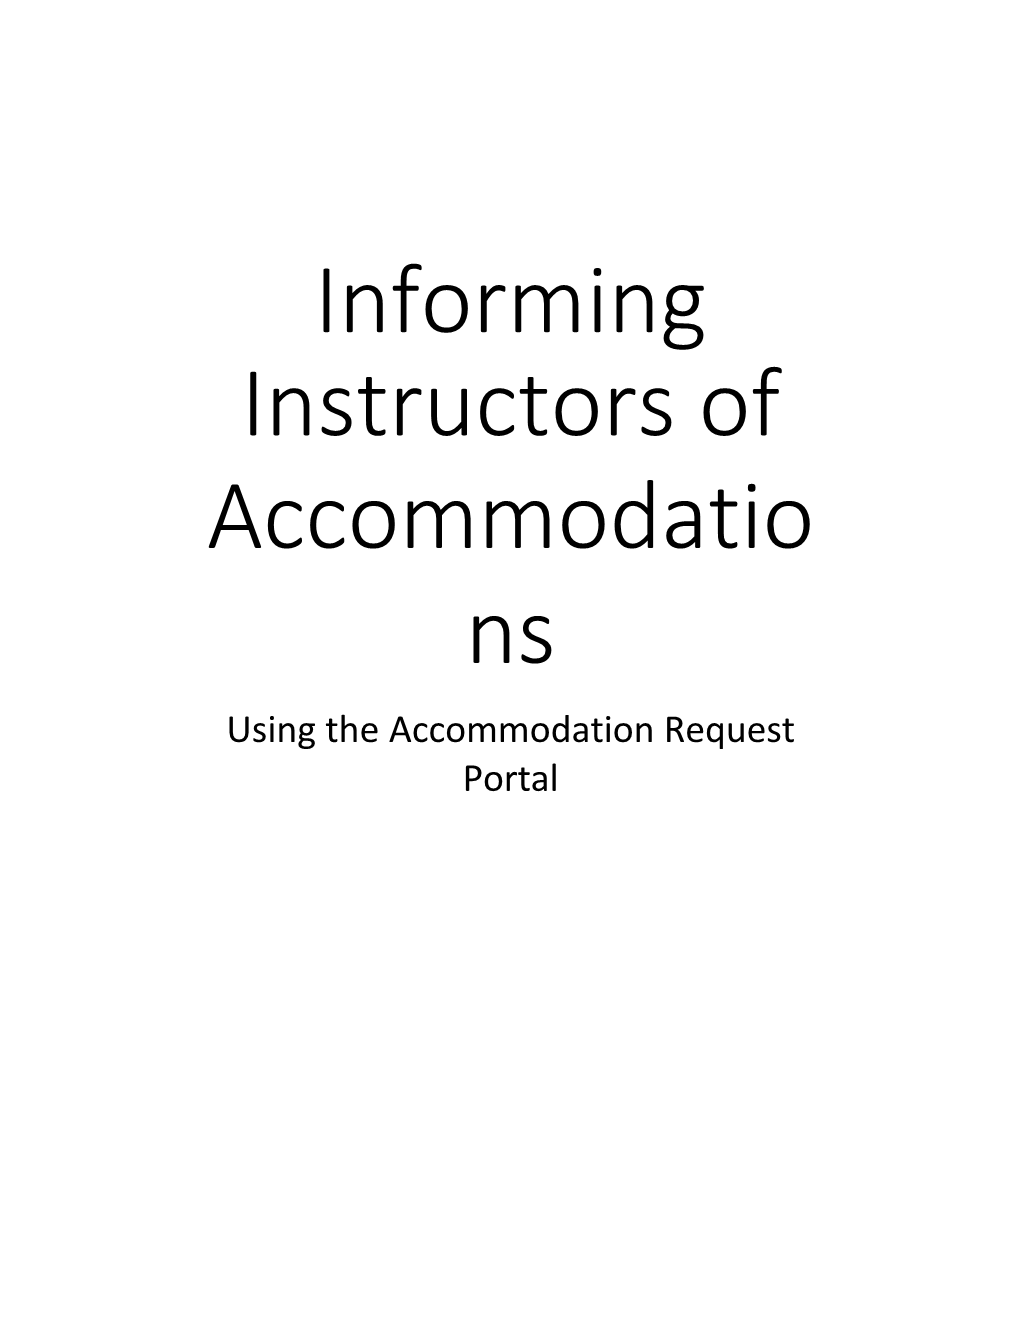 Informing Instructors of Accommodations